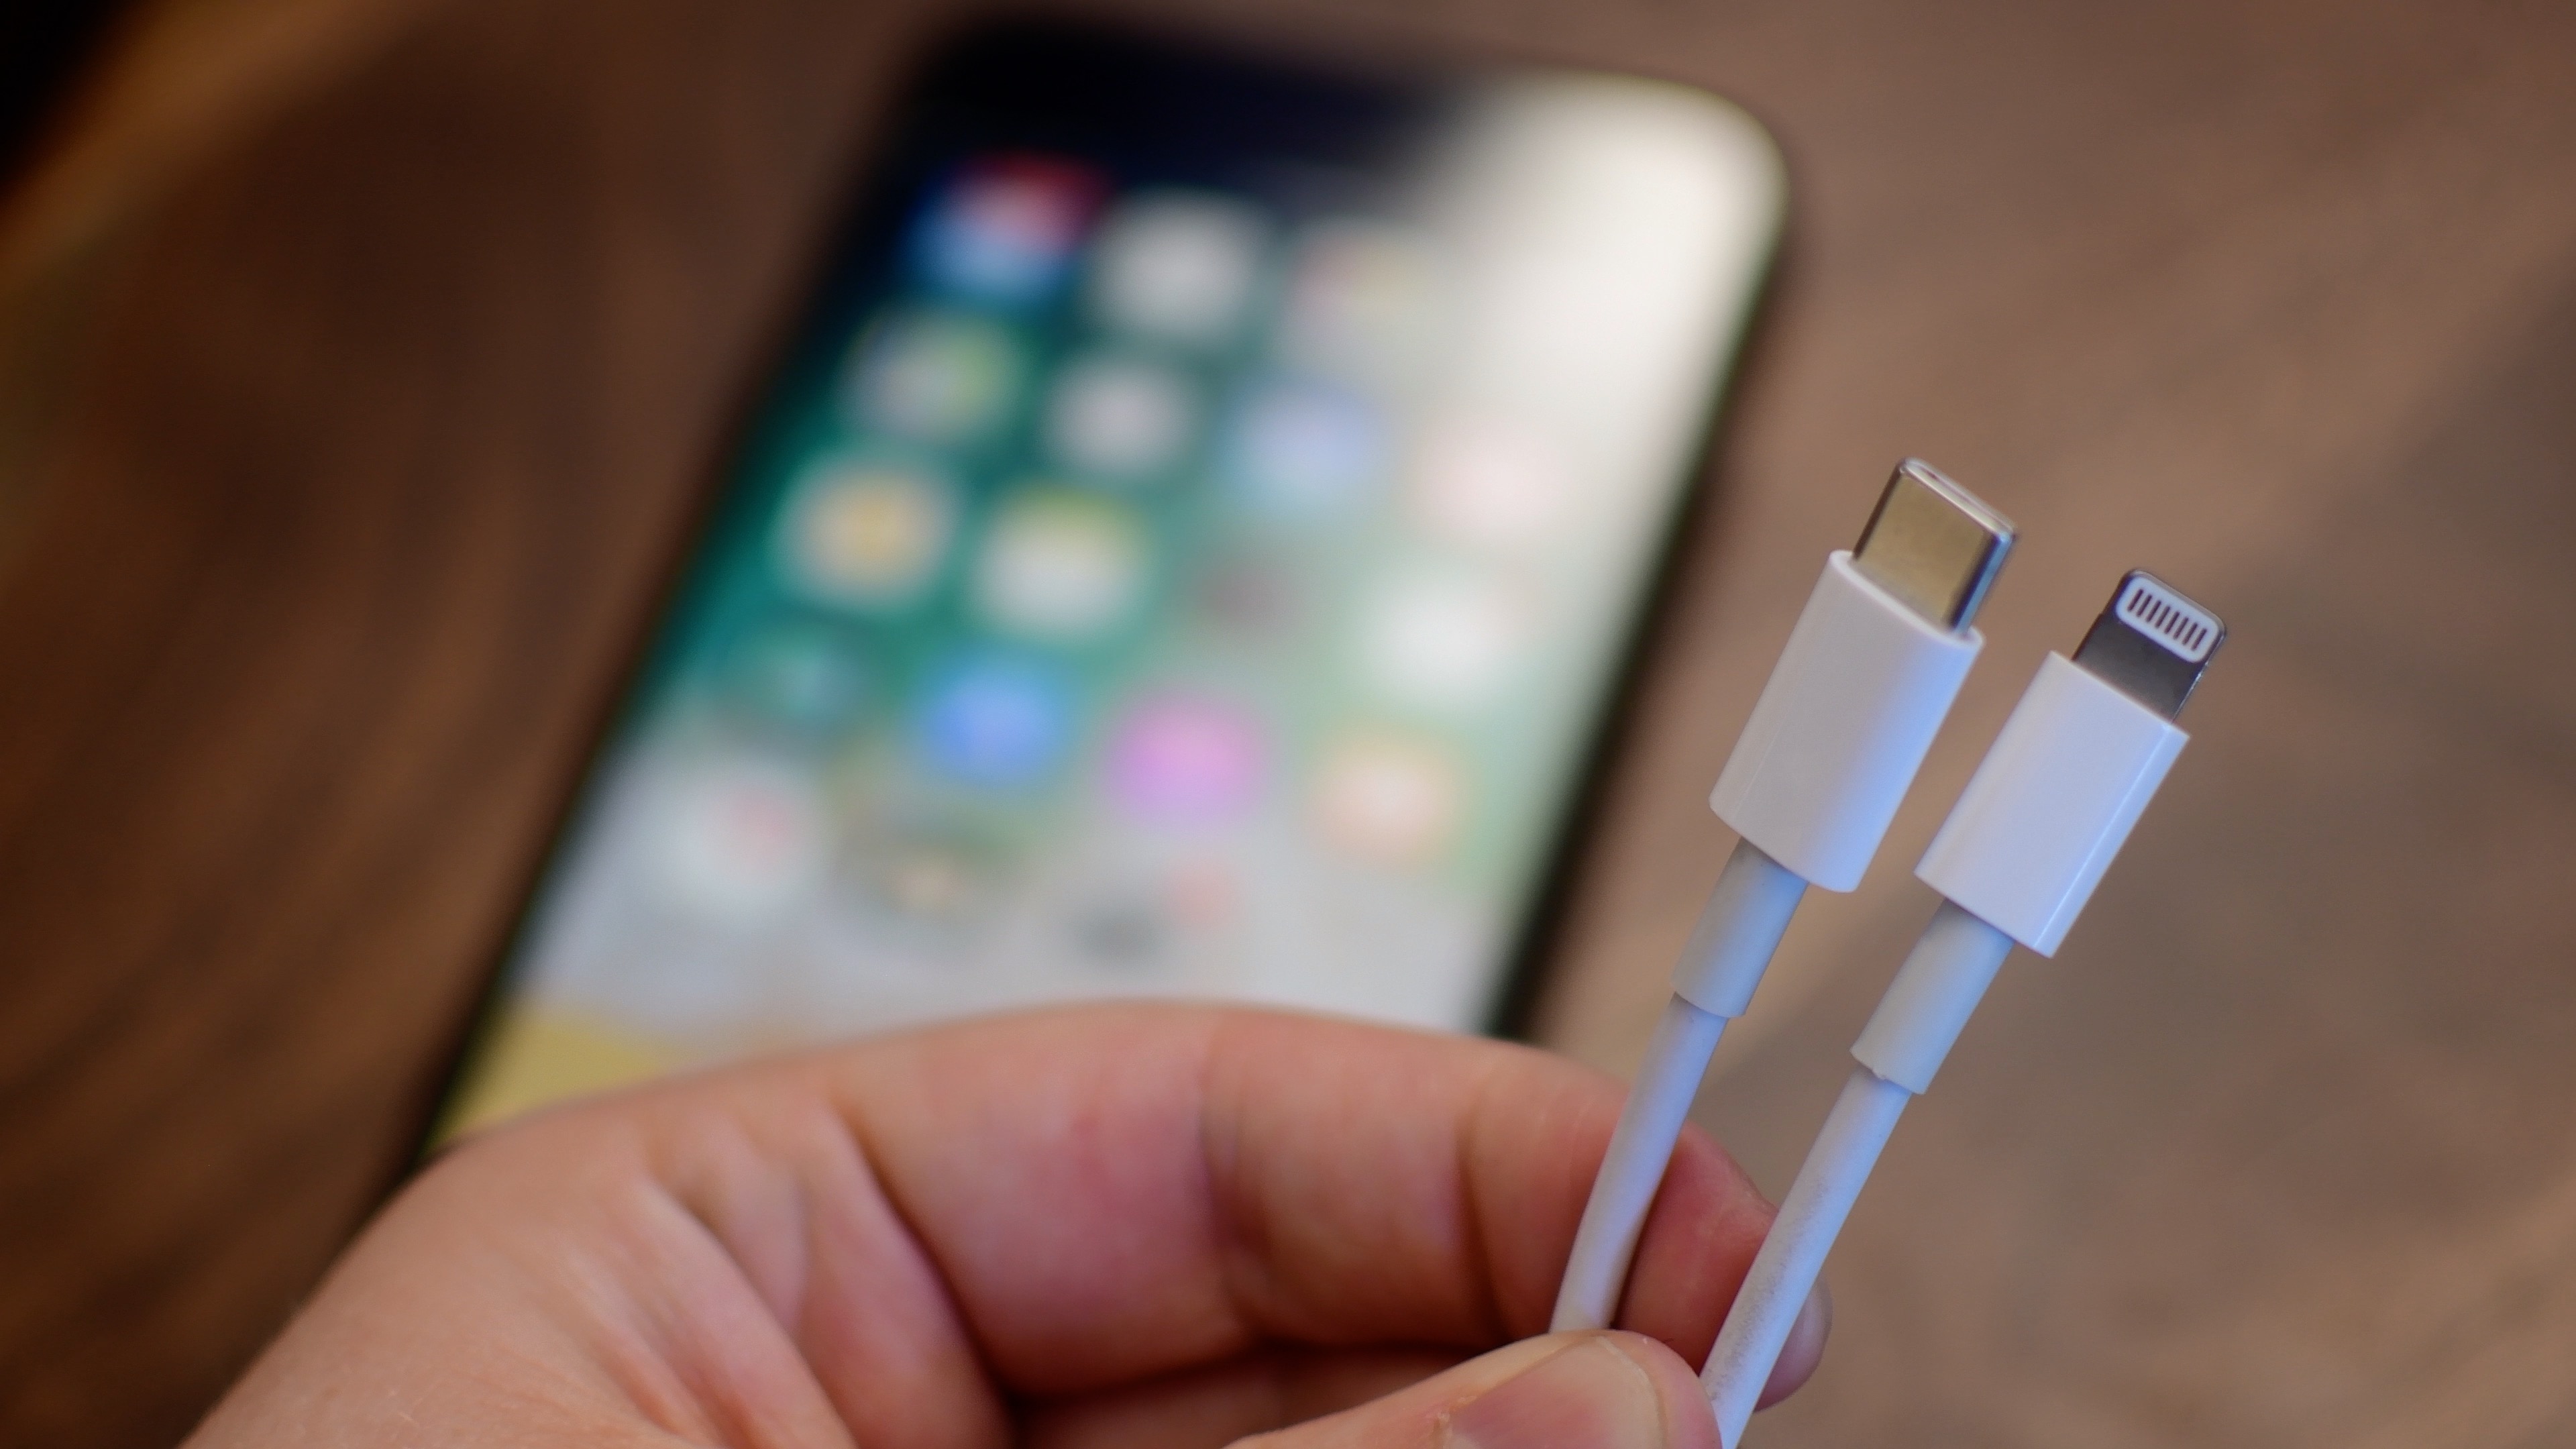 The best power adapters to fast charge iPhone 8 and iPhone X